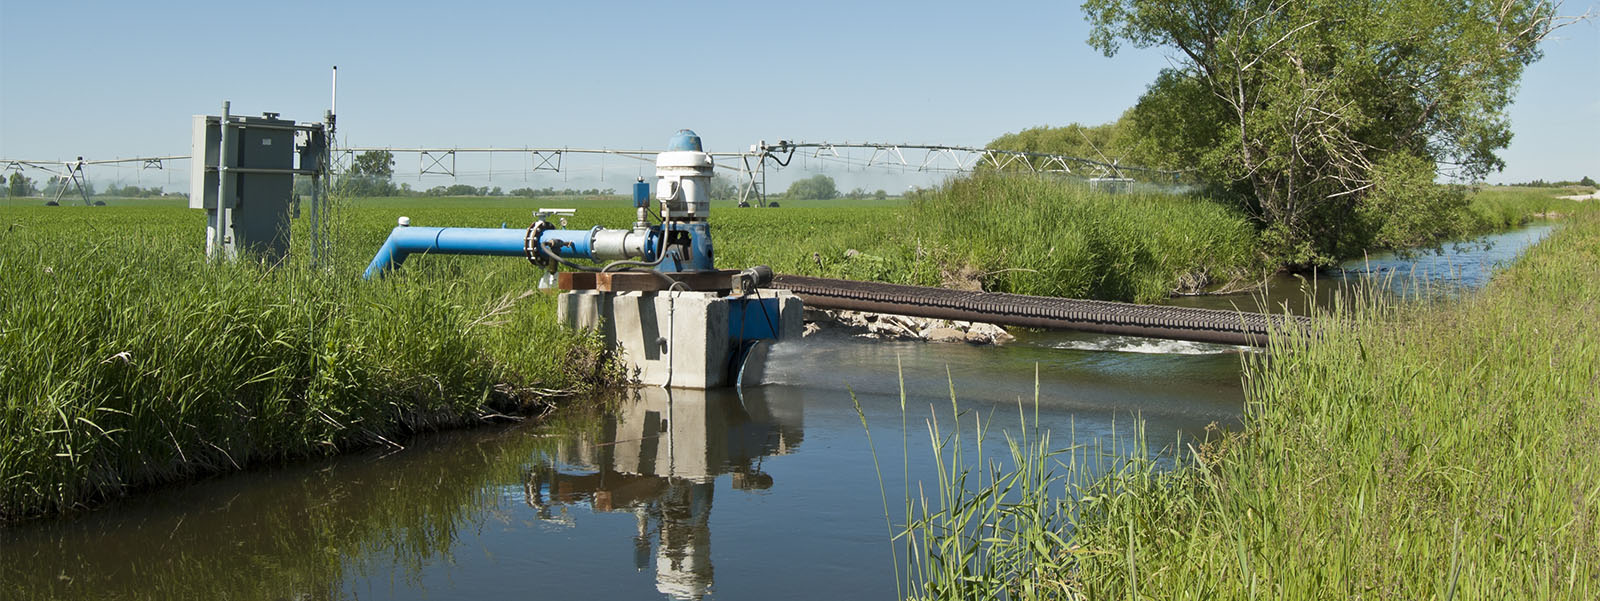 A pump in a stream provides water to a pivot irrigation system that waters a field of crops.